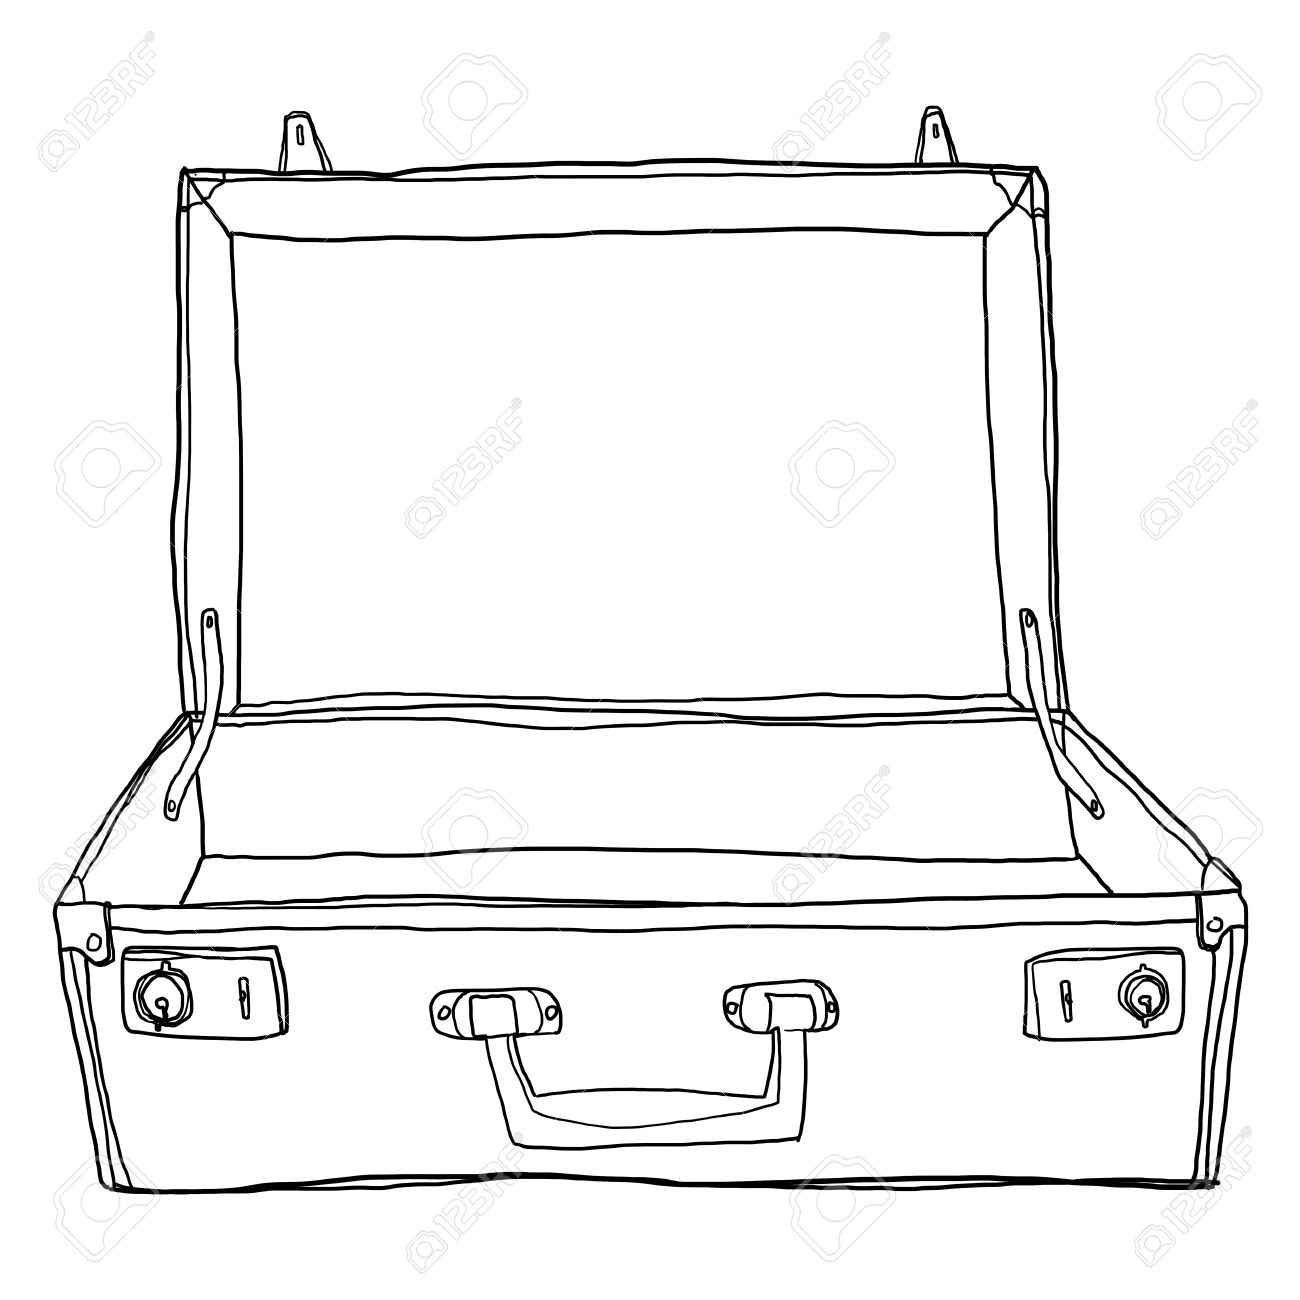 Stock Illustration With Blank Suitcase Template